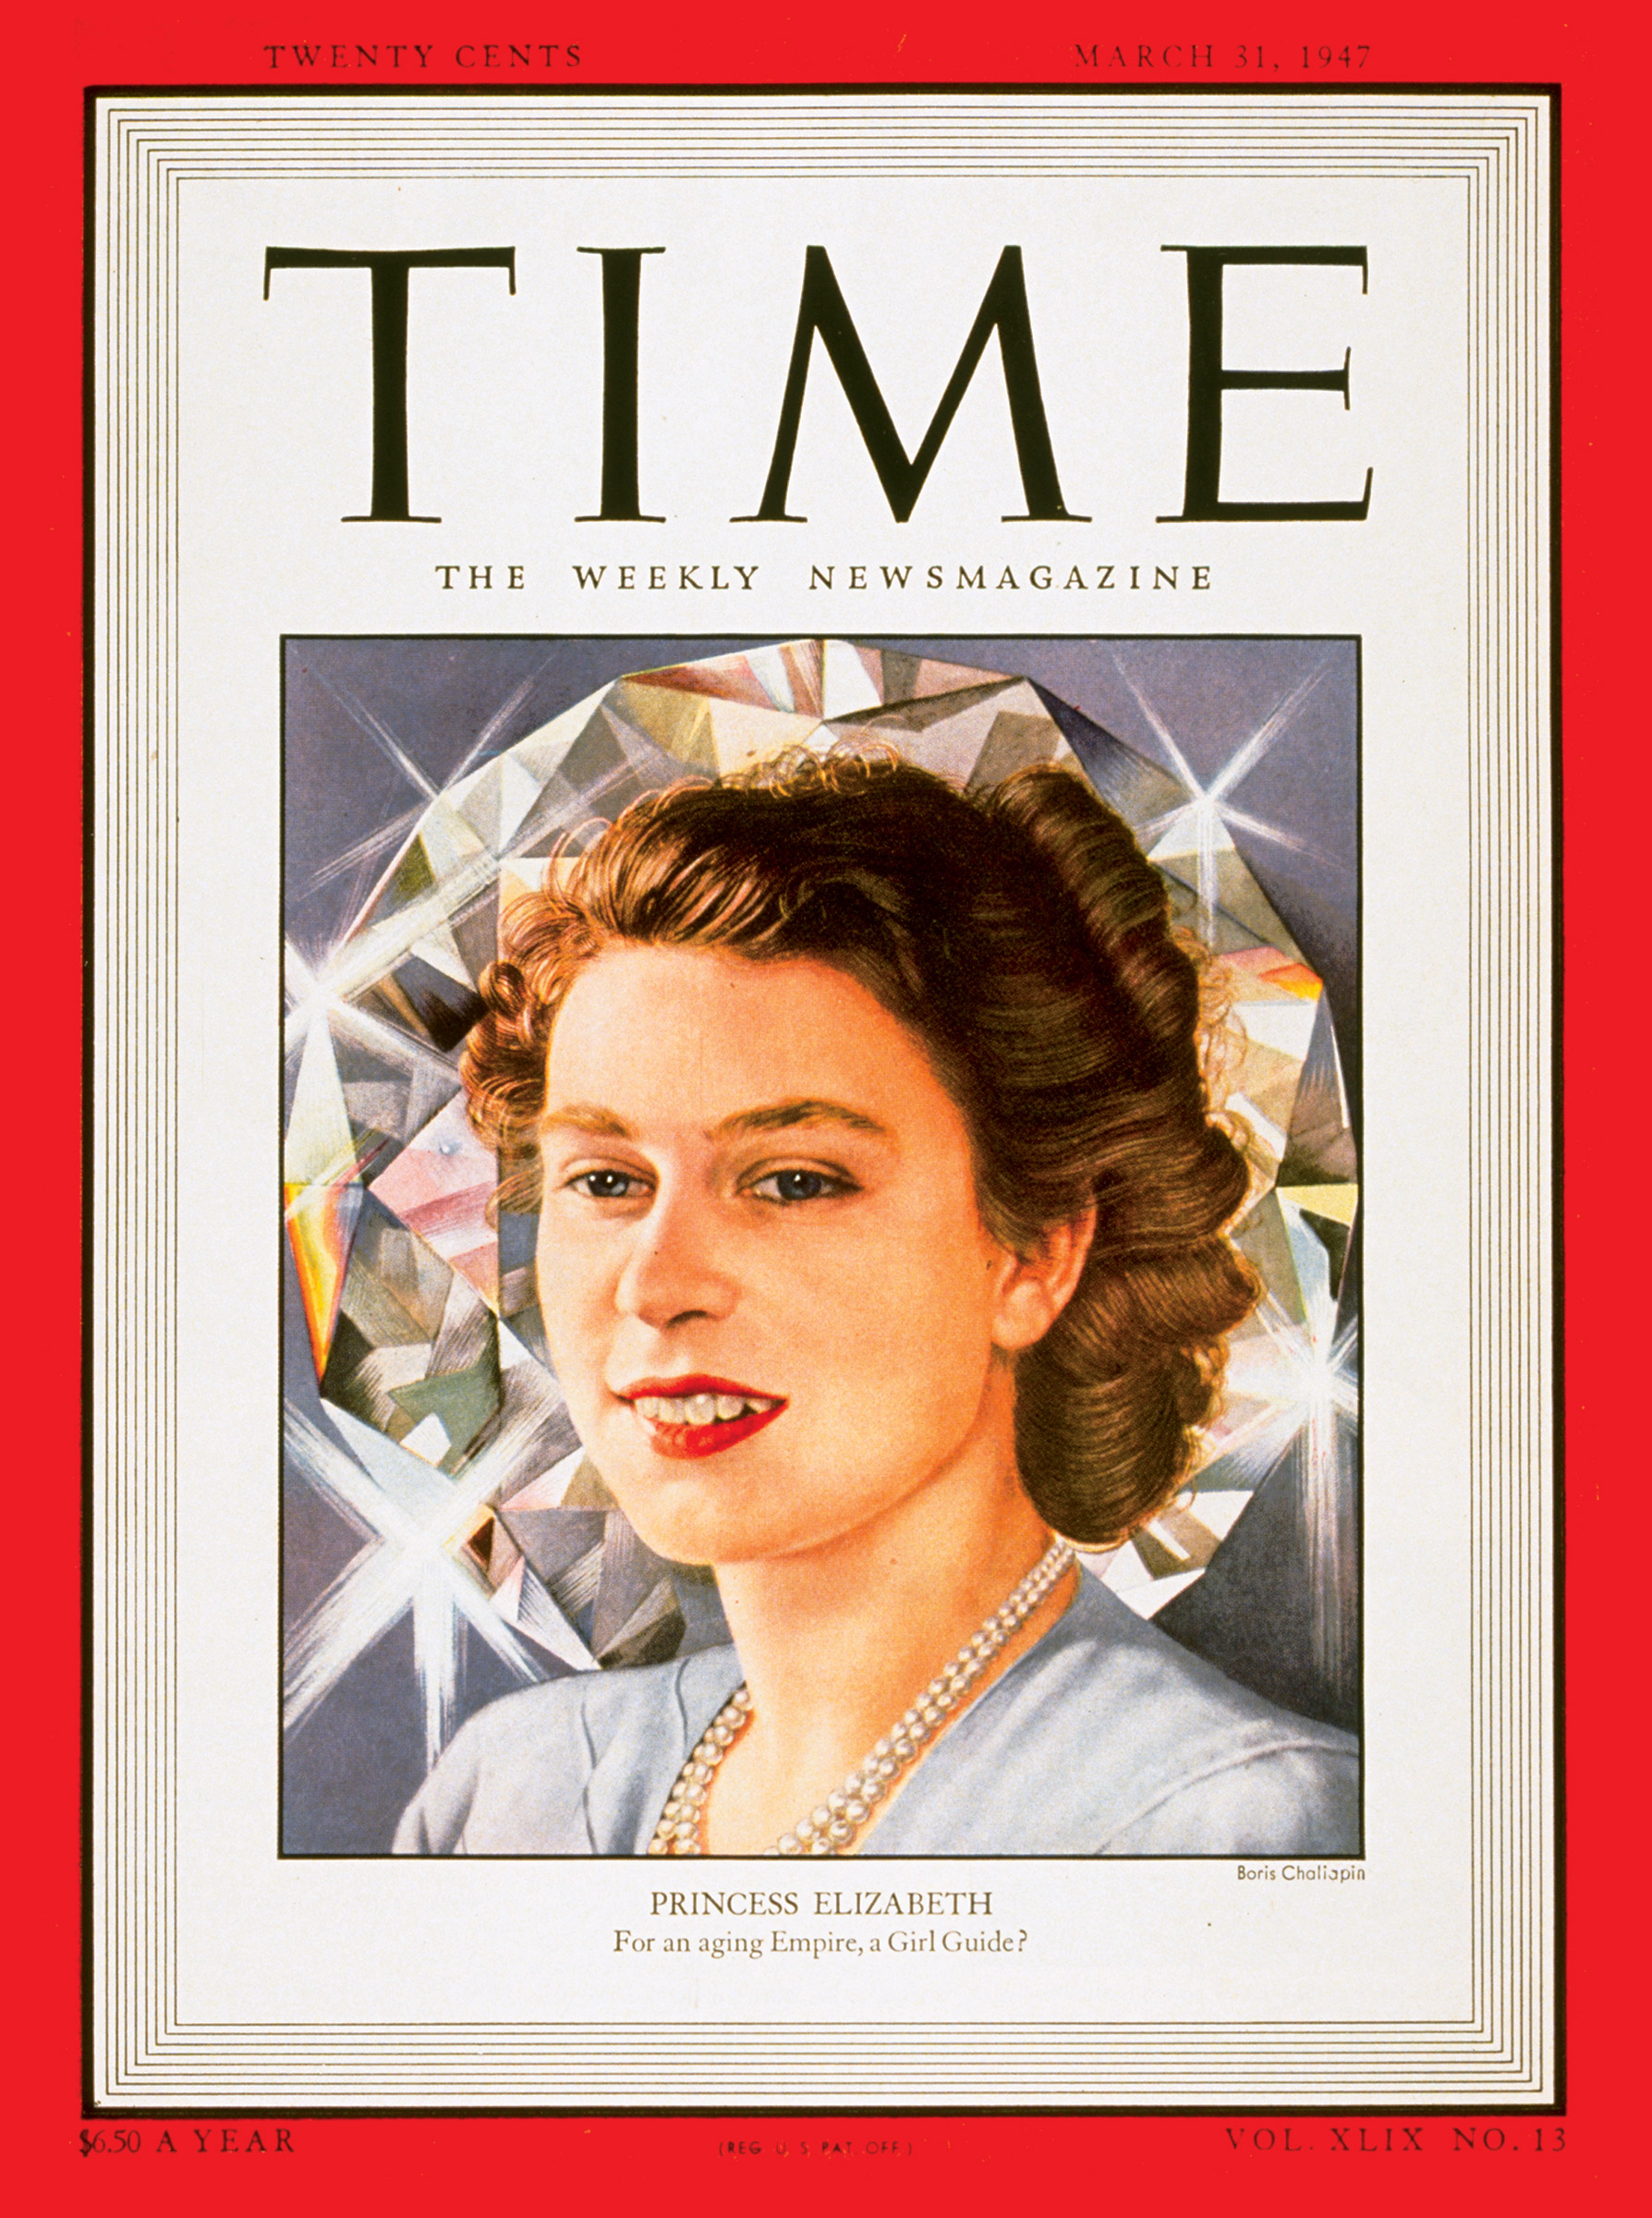 Then-Princess Elizabeth on the Mar. 31, 1947, cover of TIME